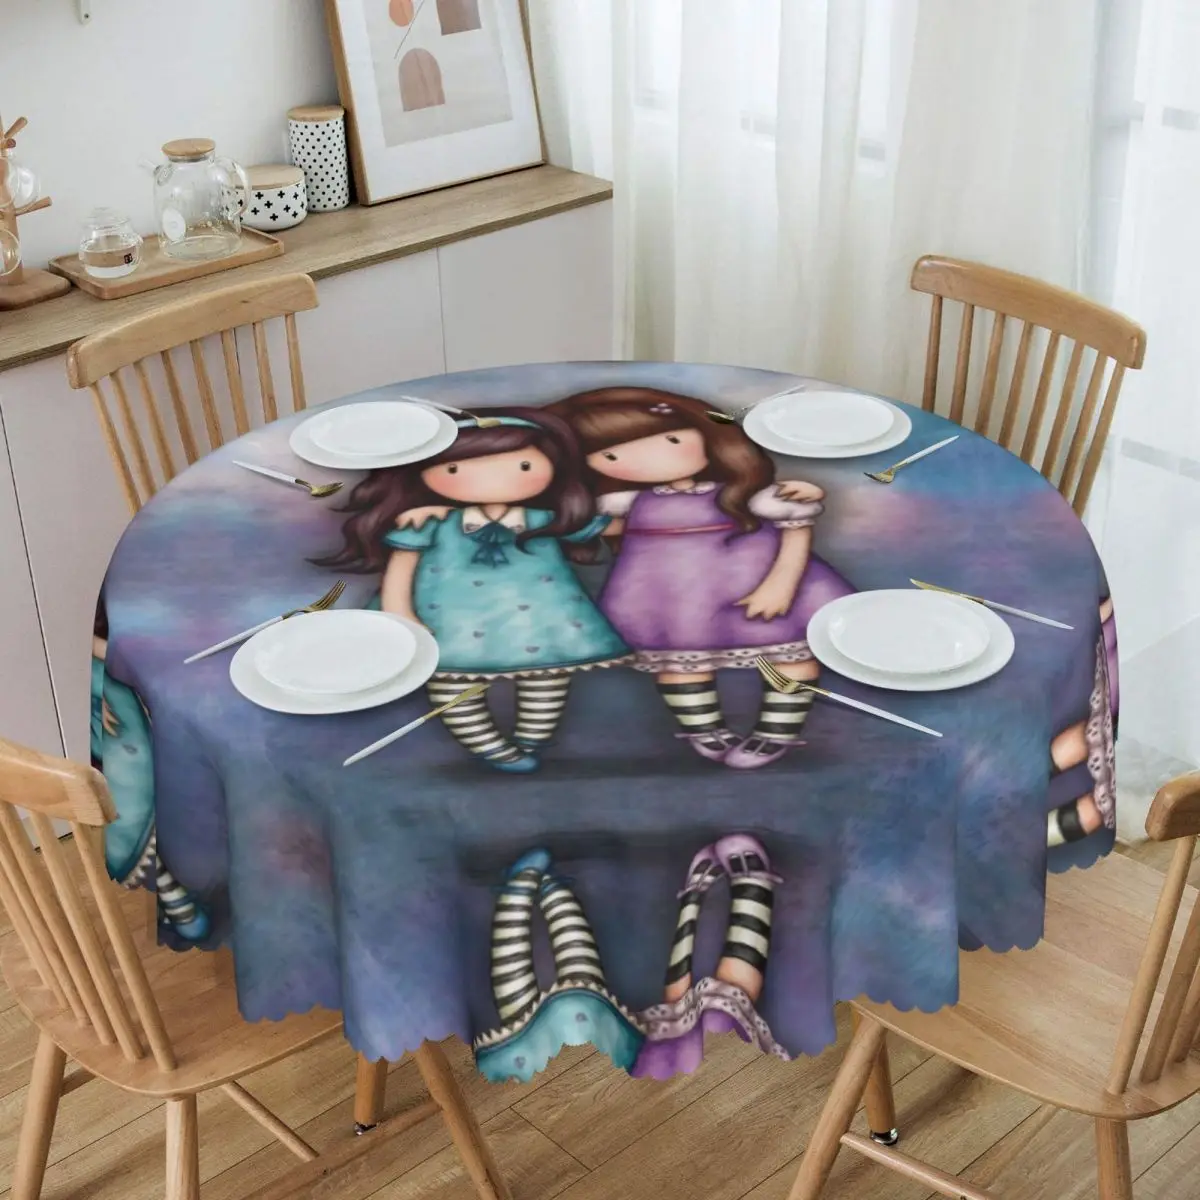 

Round Fitted Santoro Gorjuss Table Cloth Waterproof Tablecloth 60 inch Table Cover for Kitchen Dinning